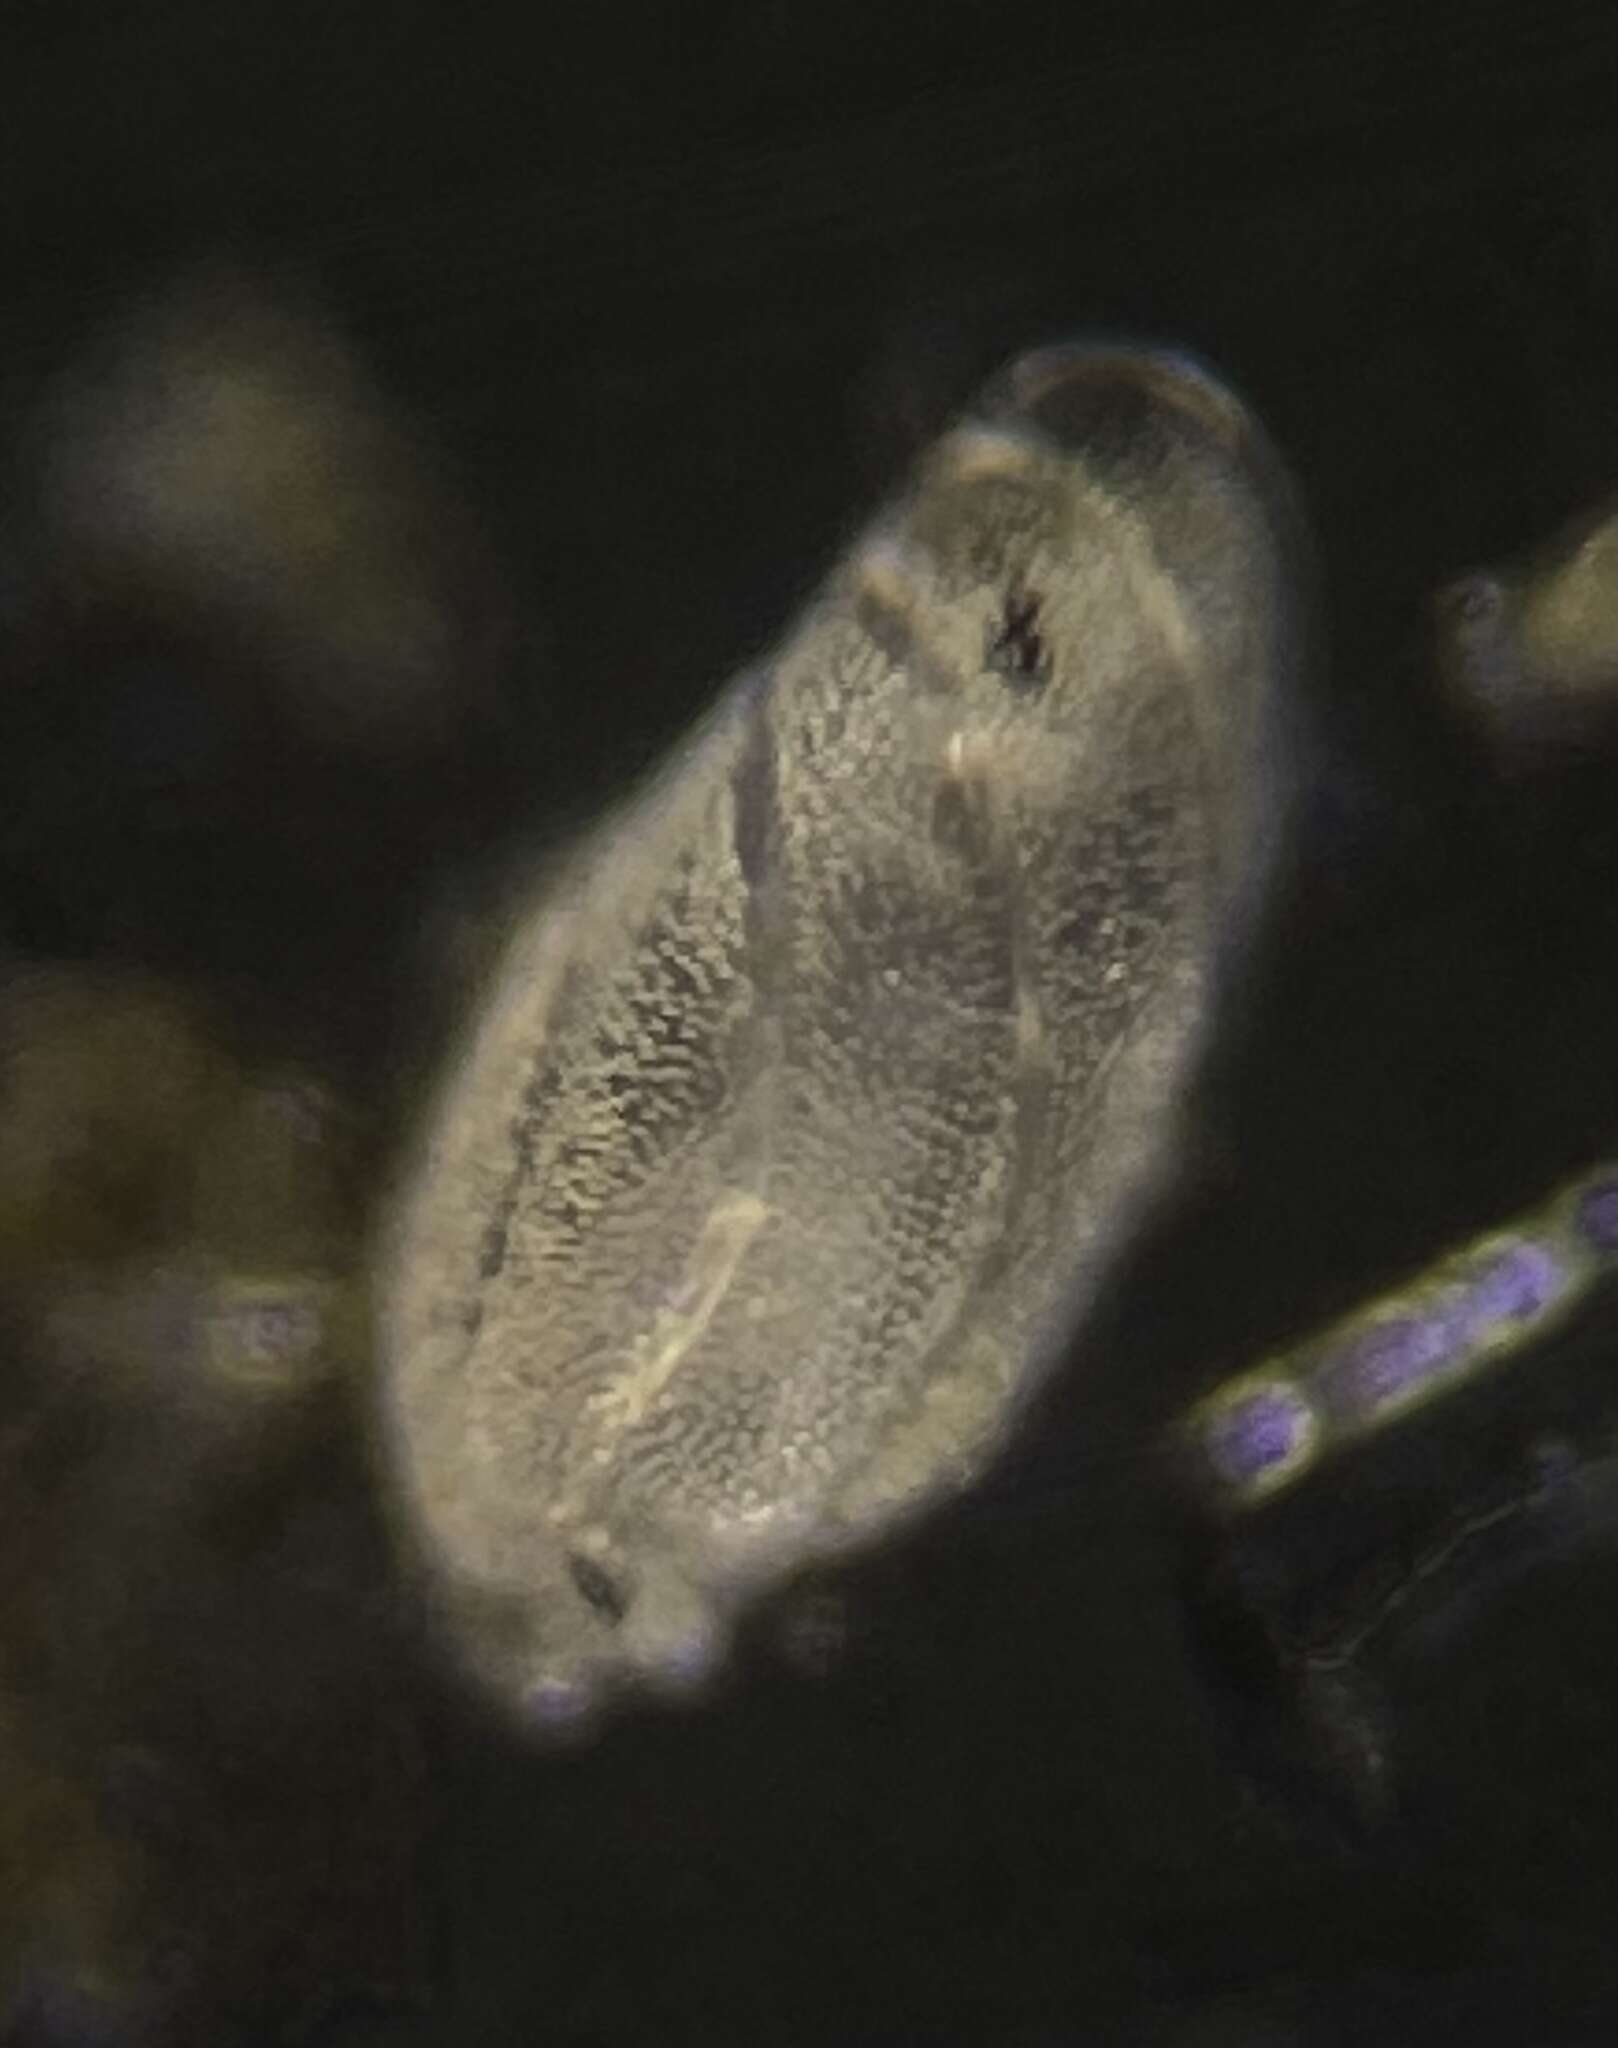 Image of Buliminellidae